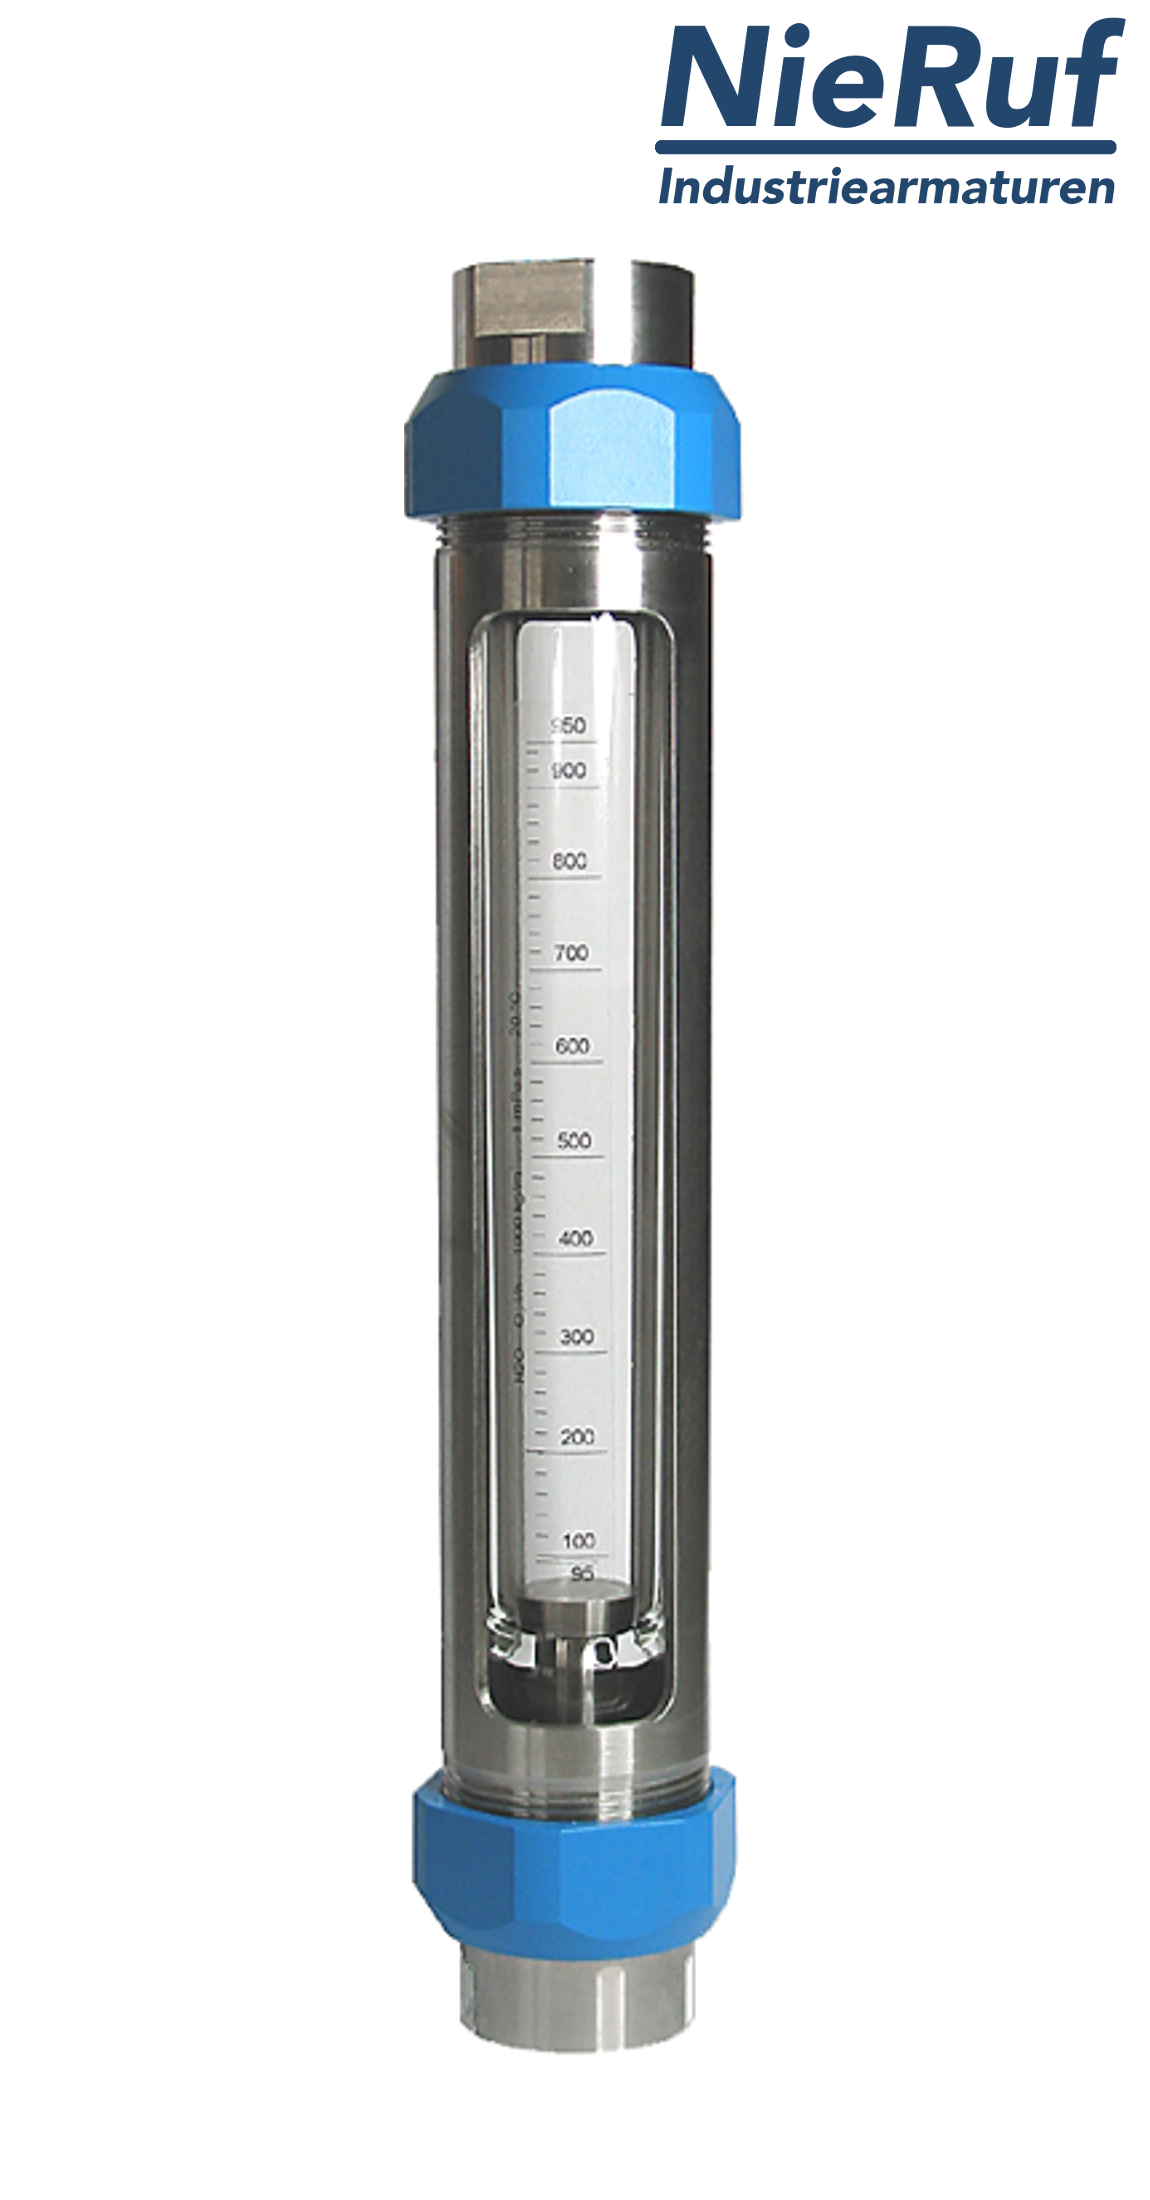 Variable area flowmeter stainless steel + borosilicate 3/4" inch 80.0 - 800 l/h water EPDM